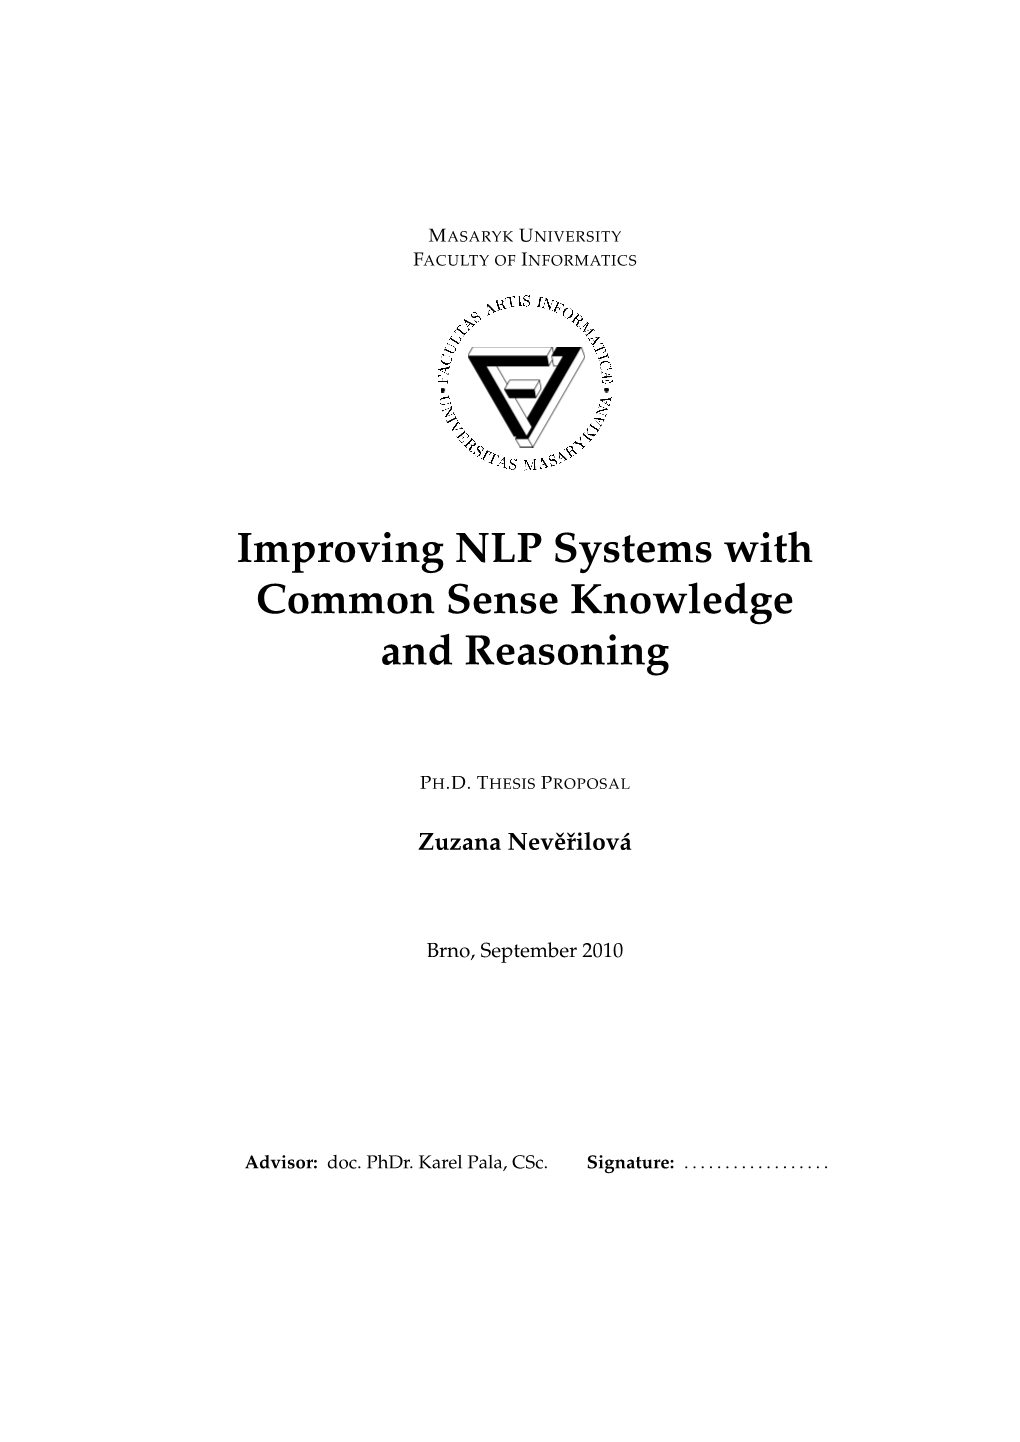 Improving NLP Systems with Common Sense Knowledge and Reasoning